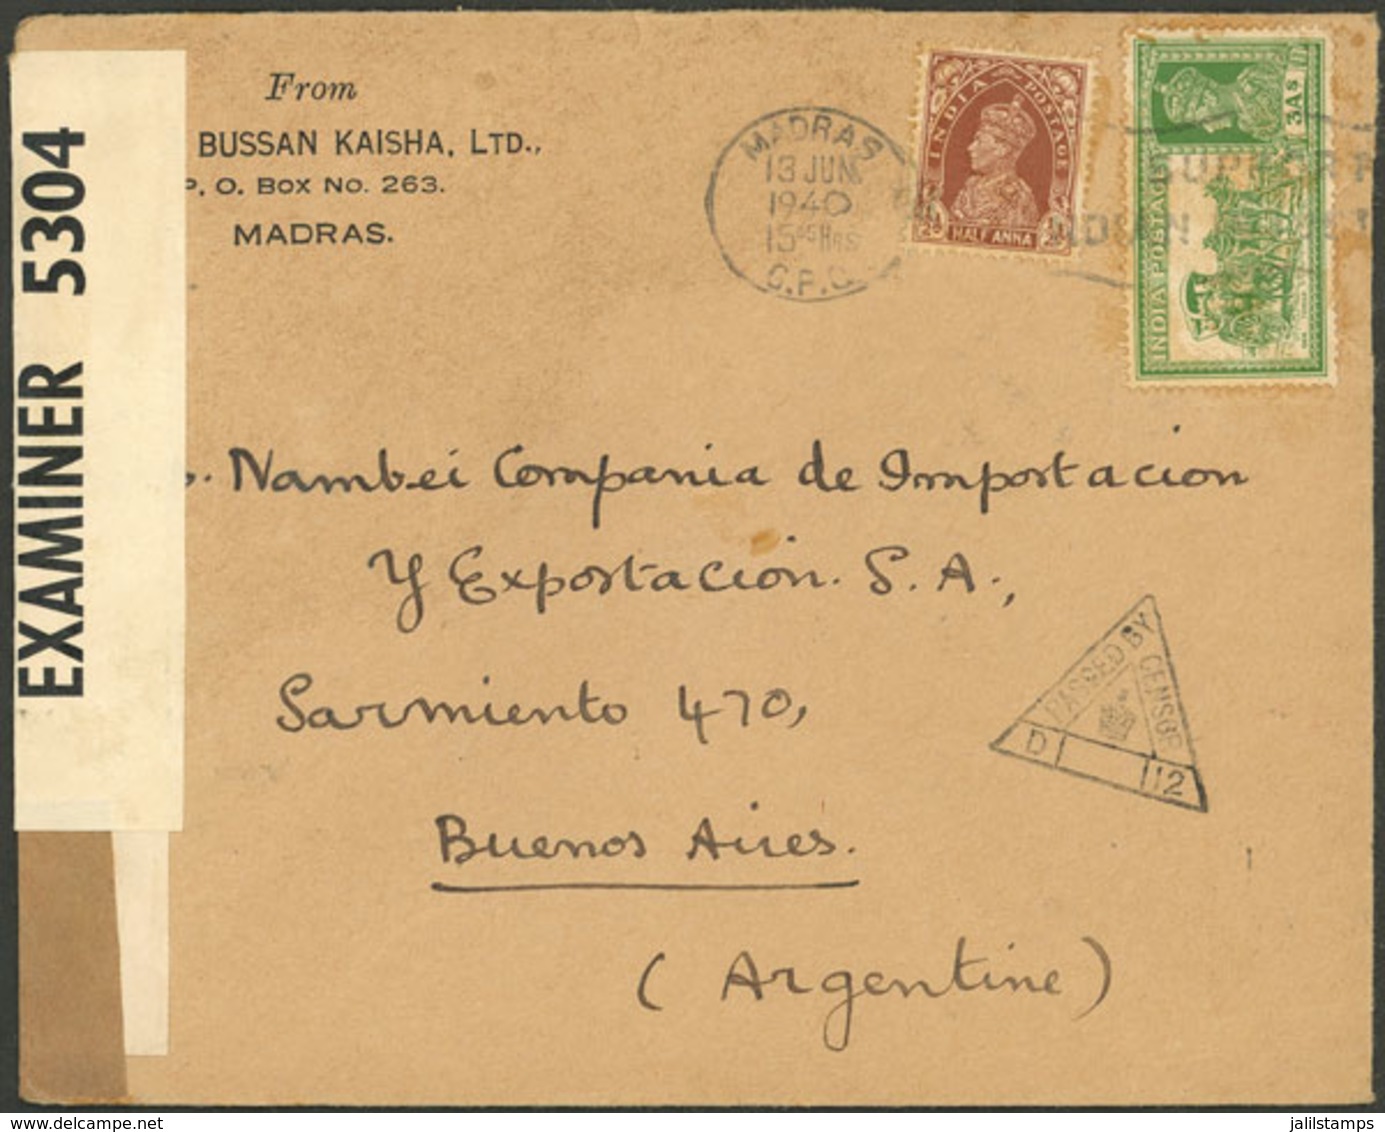 INDIA: 13/JUN/1940 Madras - Argentina, Cover Franked With 3½a., With Double Indian + British Censorship, VF! - Storia Postale